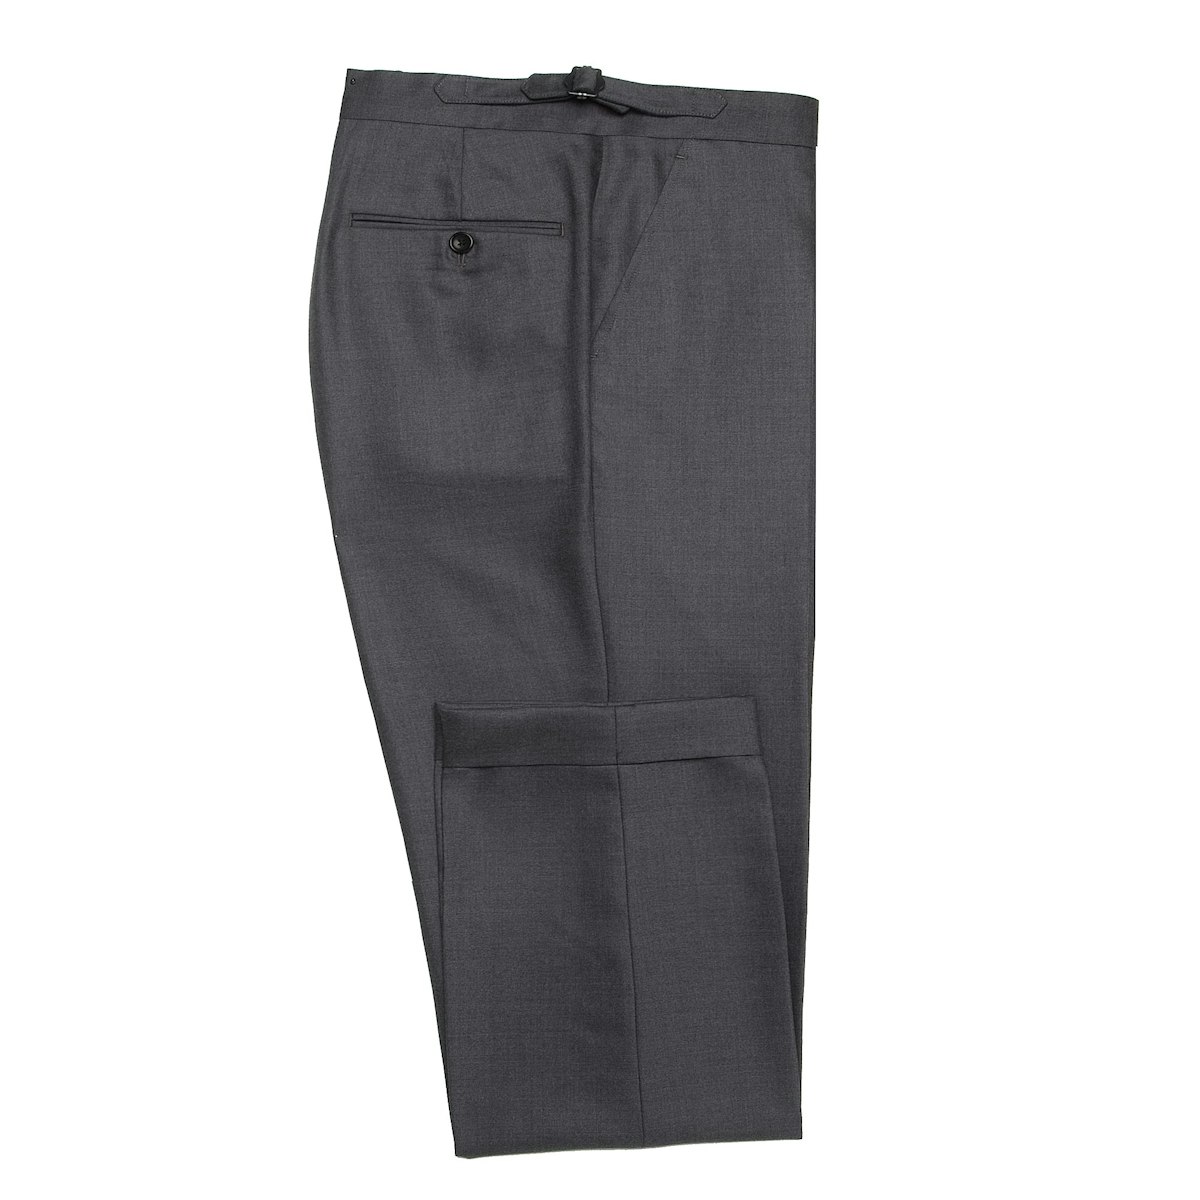 InStitchu Collection The Prescot Pants